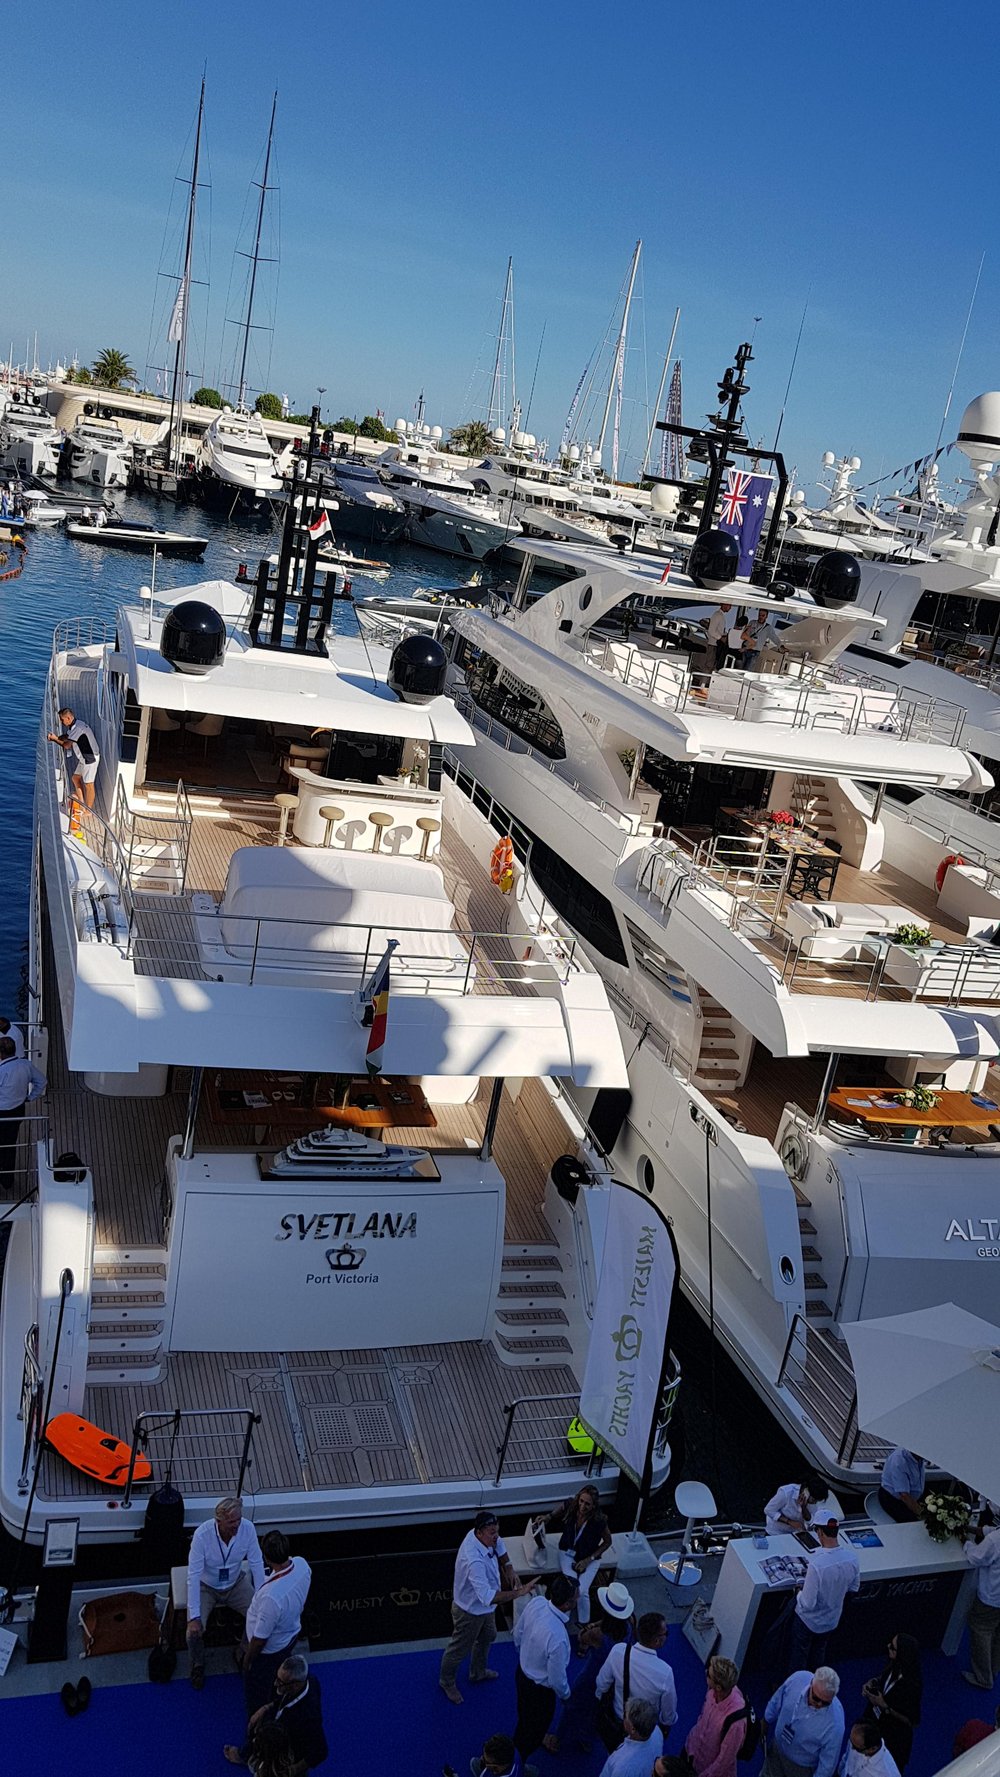 Gulf Craft at the 2018 Monaco Yacht Show-Day 2 (6)